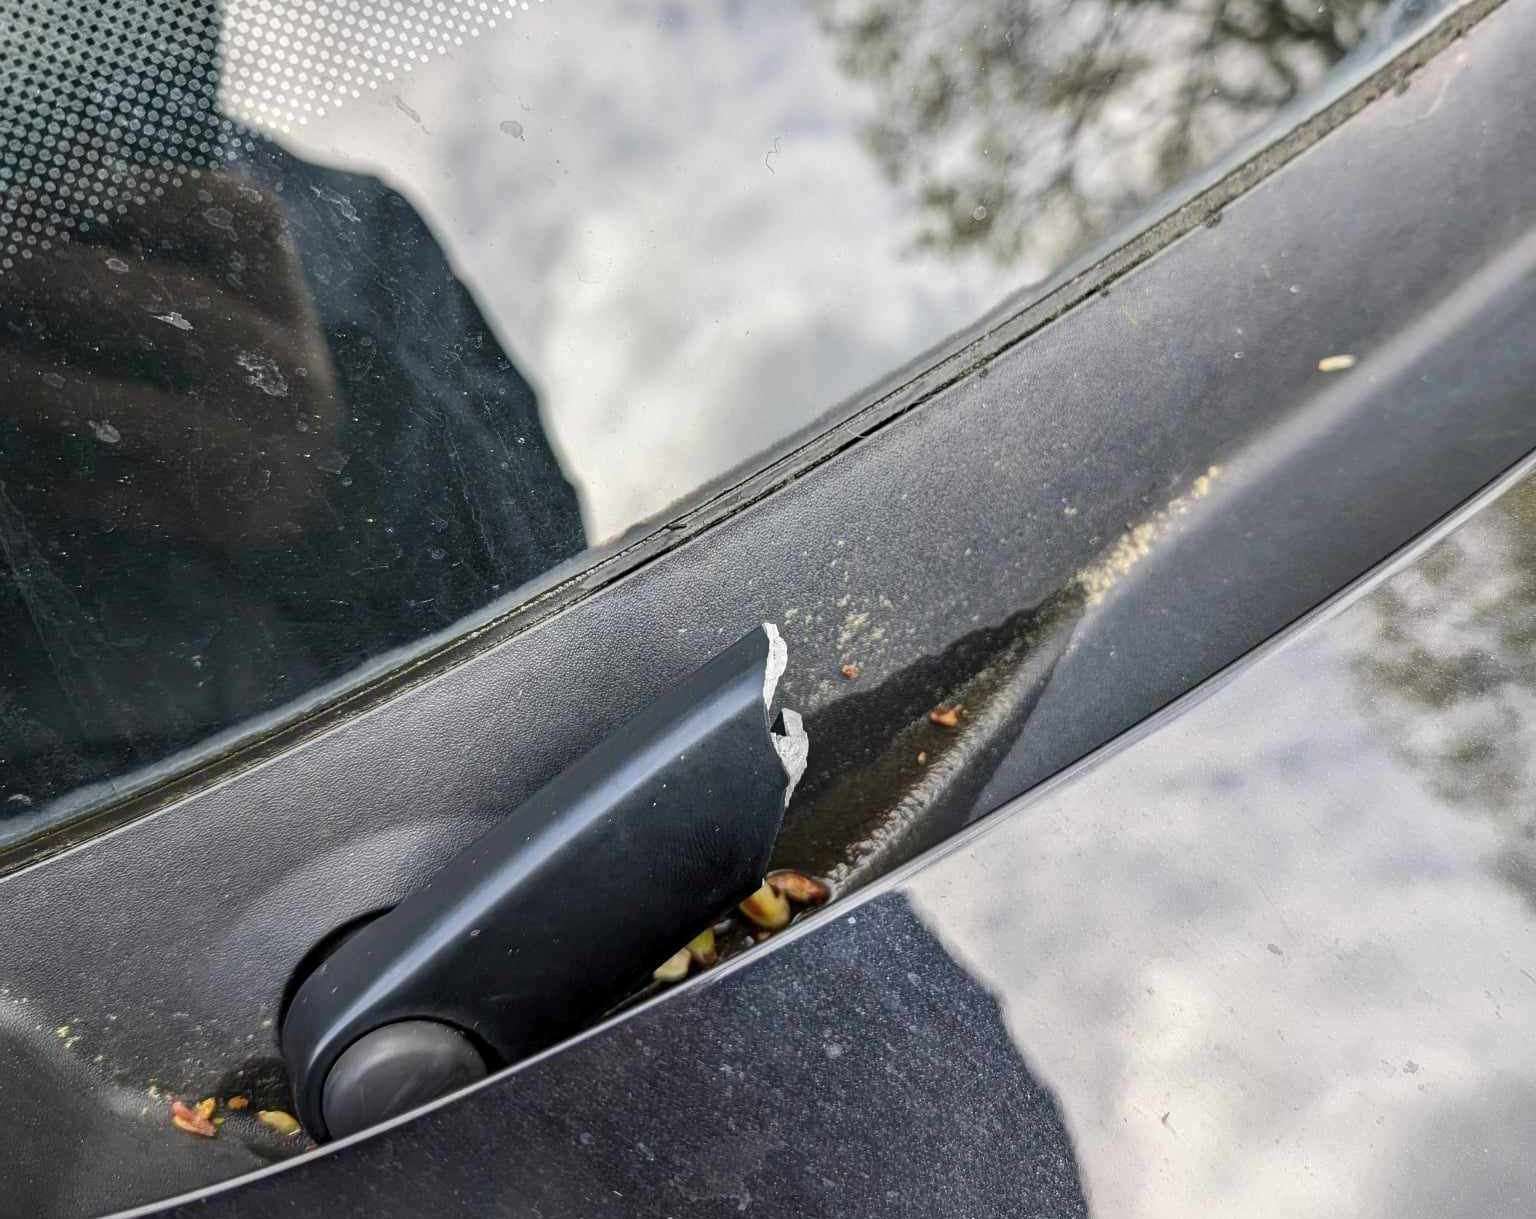 The Volkswagen’s window wipers were also snapped off